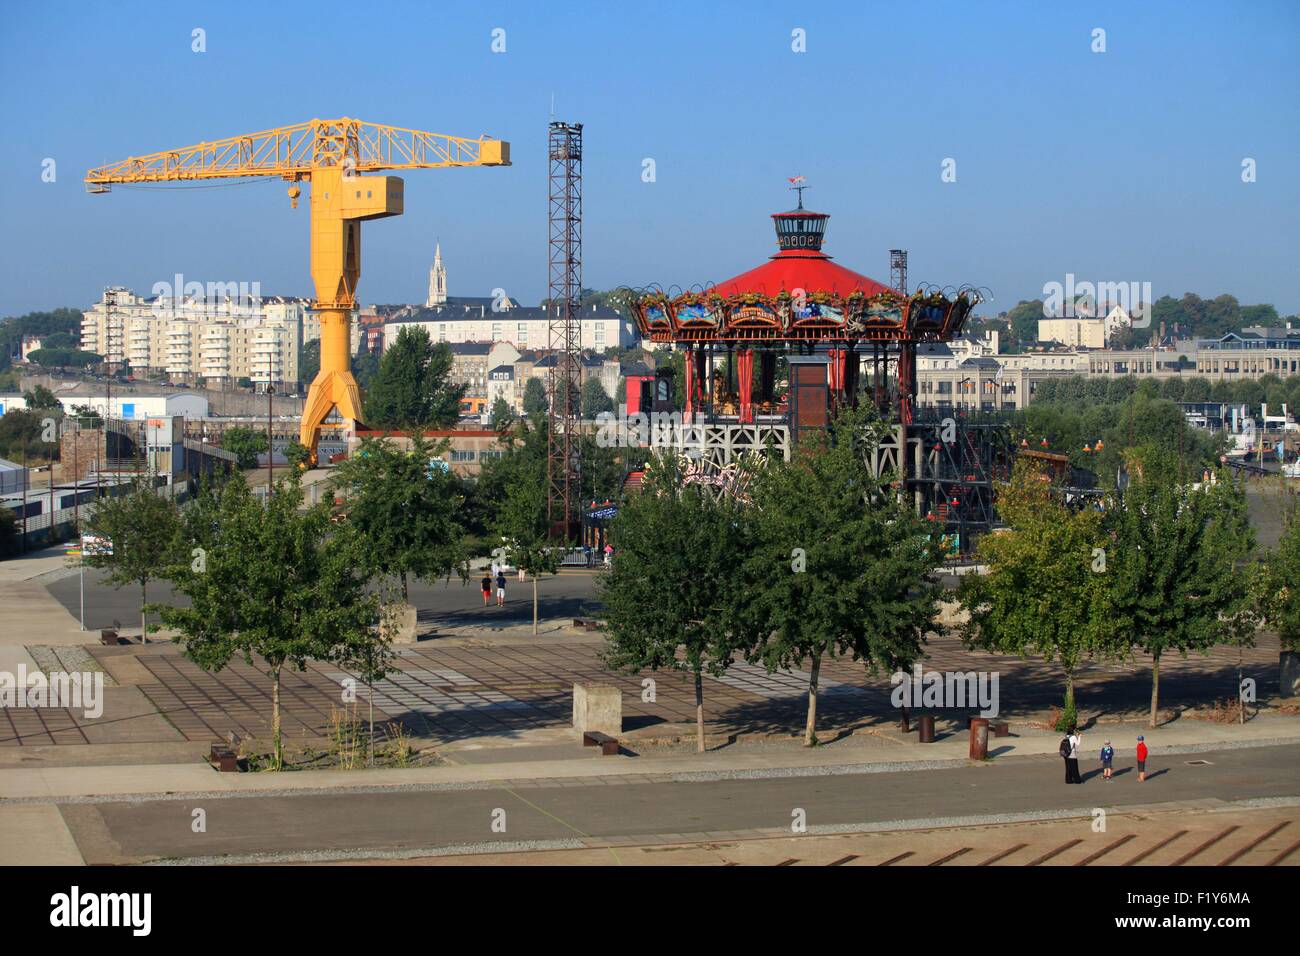 France, Loire Atlantique, Nantes, Carroussel of the Marine Worlds and the Crane Titan on the Island of Nantes seen since the top of the Elephant Stock Photo